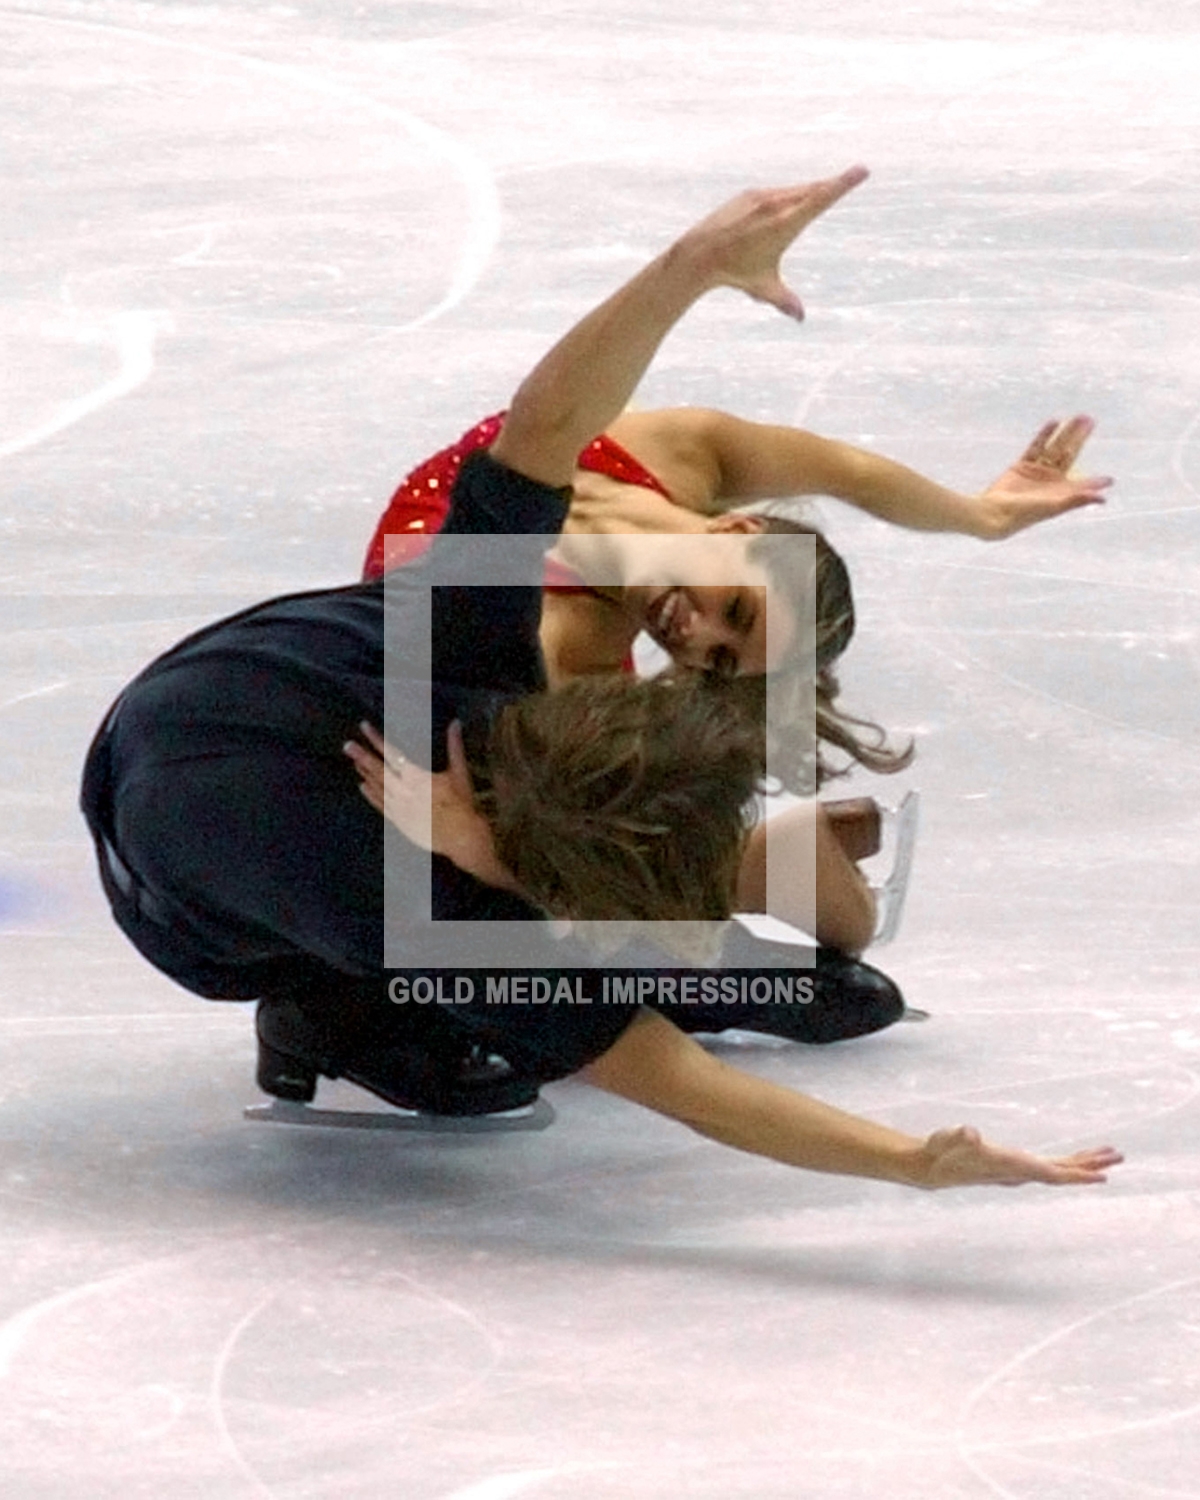 U.S. ice dance team Naomi Lang and Peter Tchernyshev compete iin the free dance program on February 18, 2002. The U.S. pair placed eleventh.